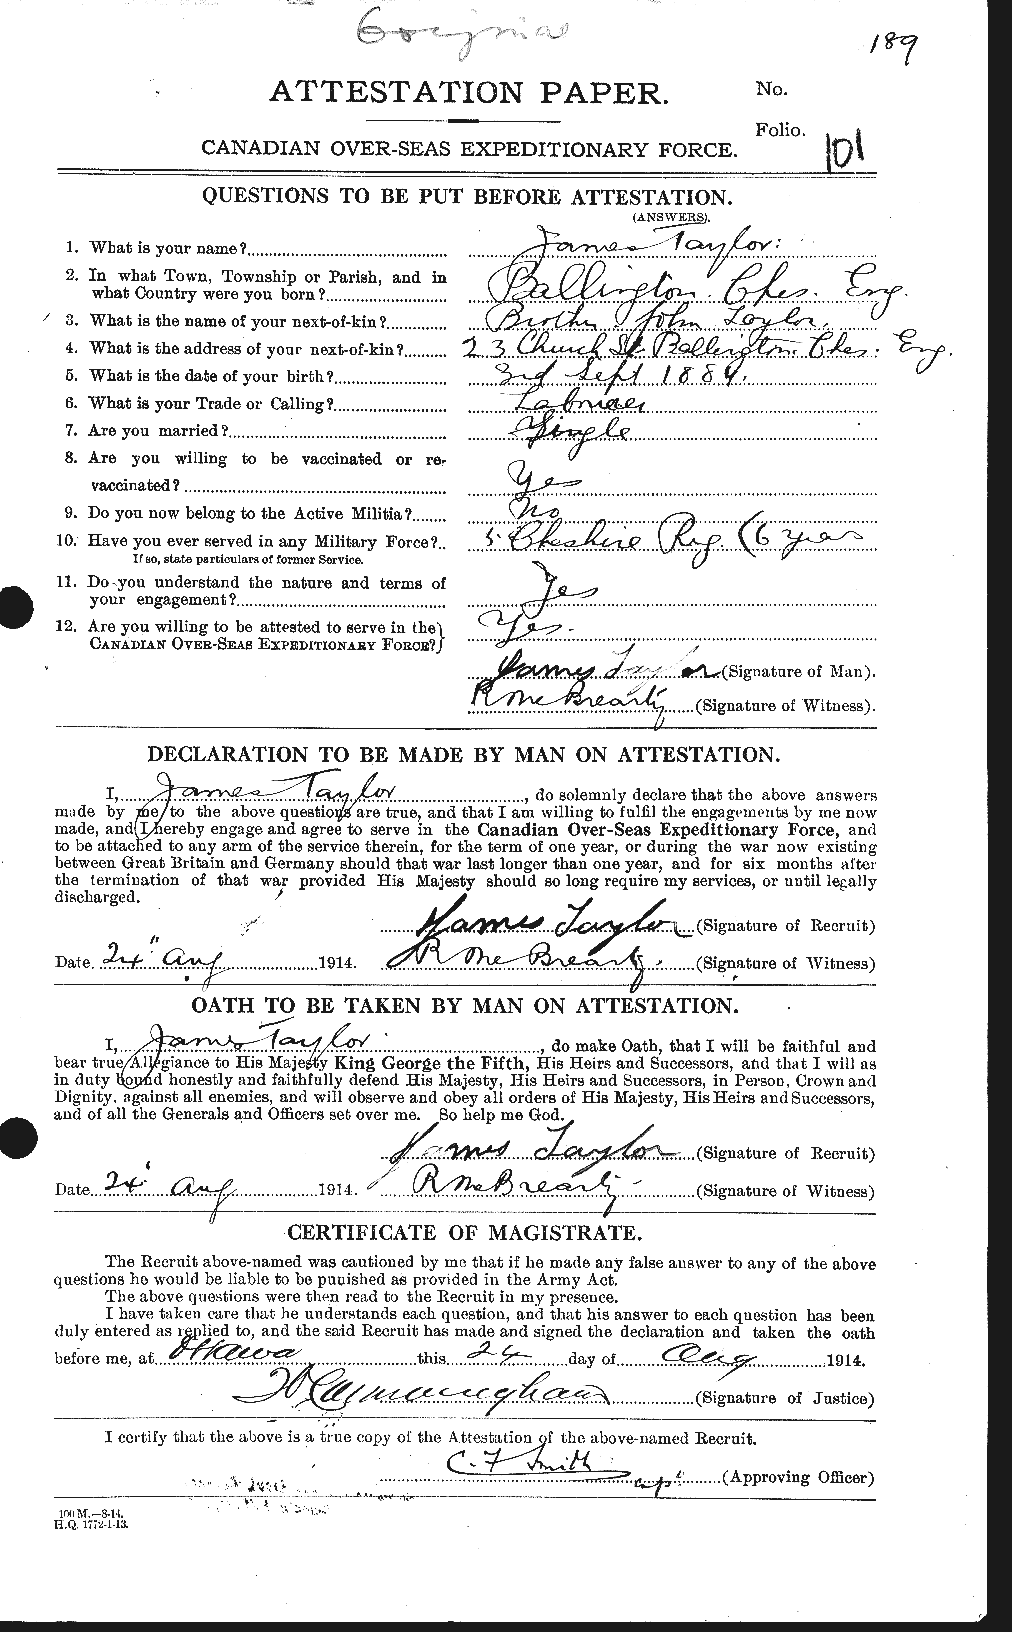 Personnel Records of the First World War - CEF 626896a